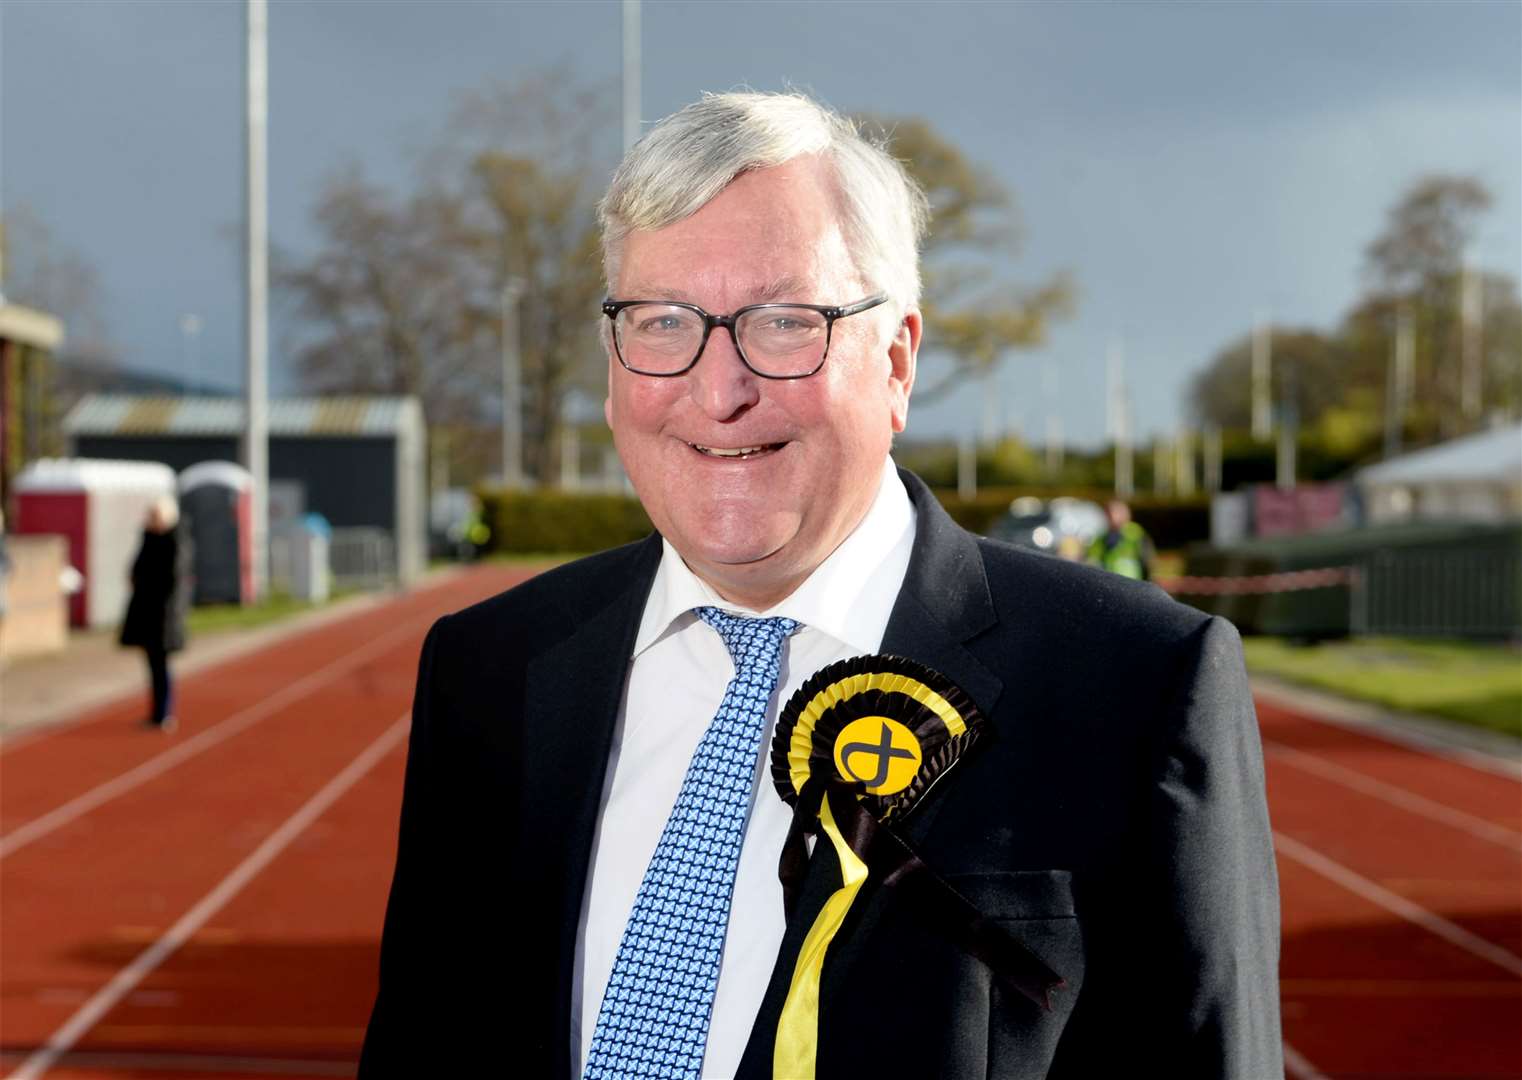 MSP Fergus Ewing shortly after being re-elected.